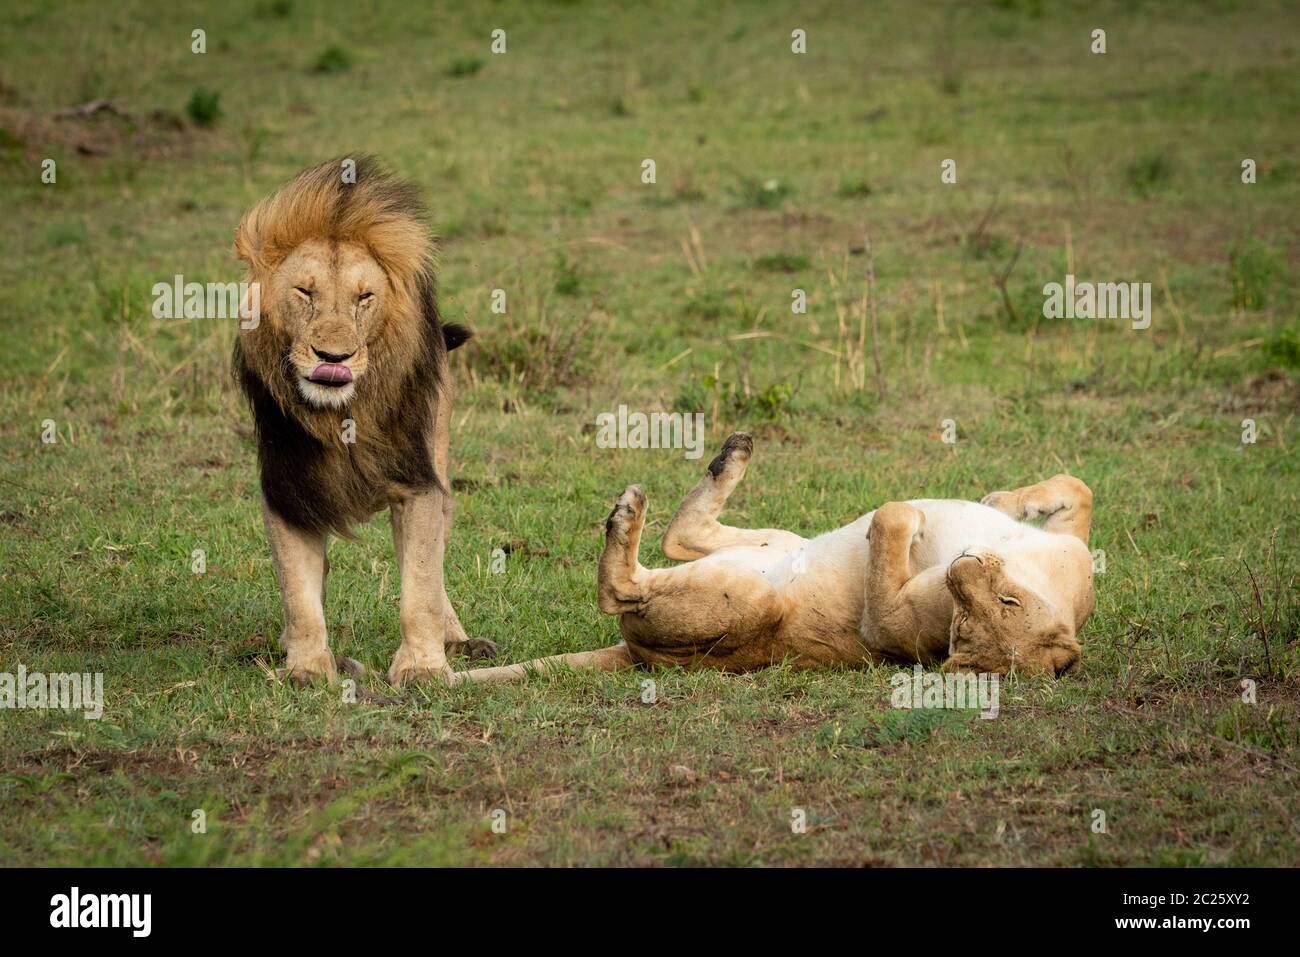 Lion stands by lioness rolling on back Stock Photo